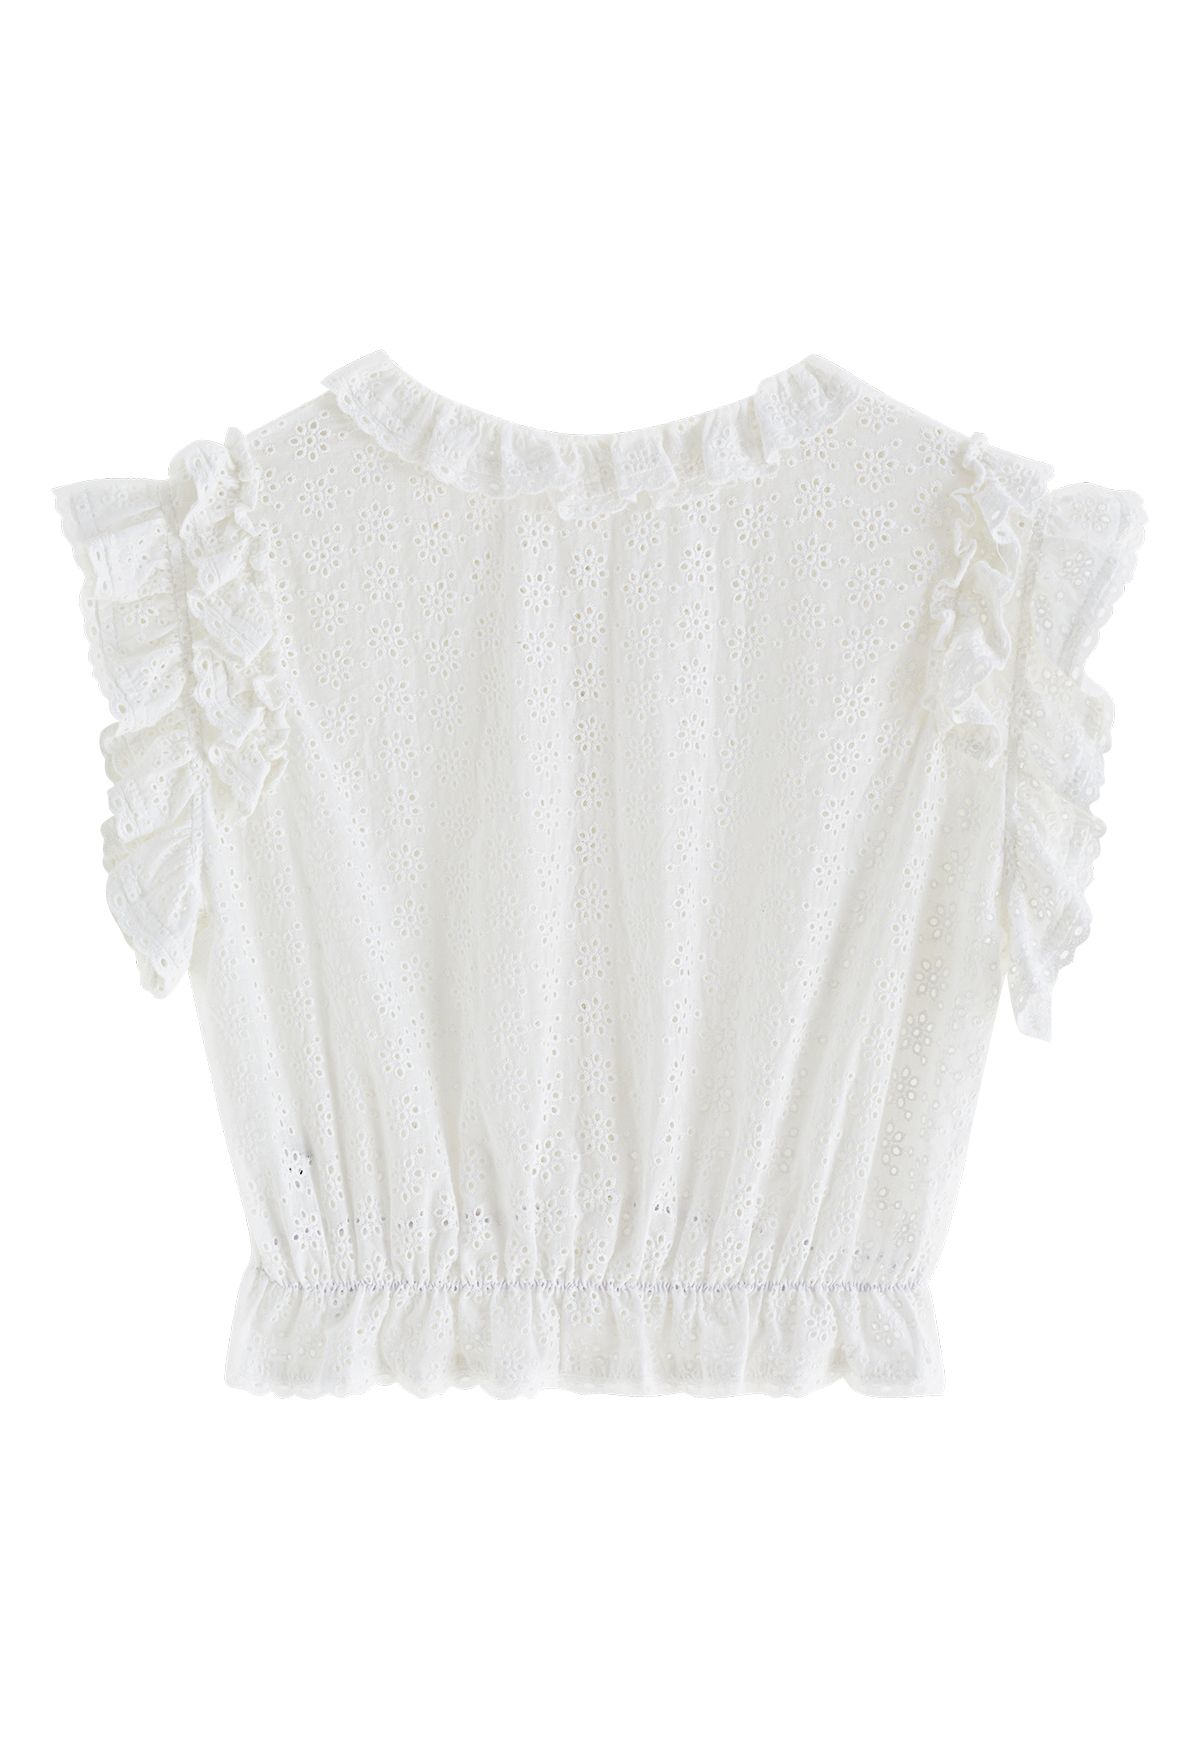 Embroidered Eyelet Ruffle Peplum Top in White